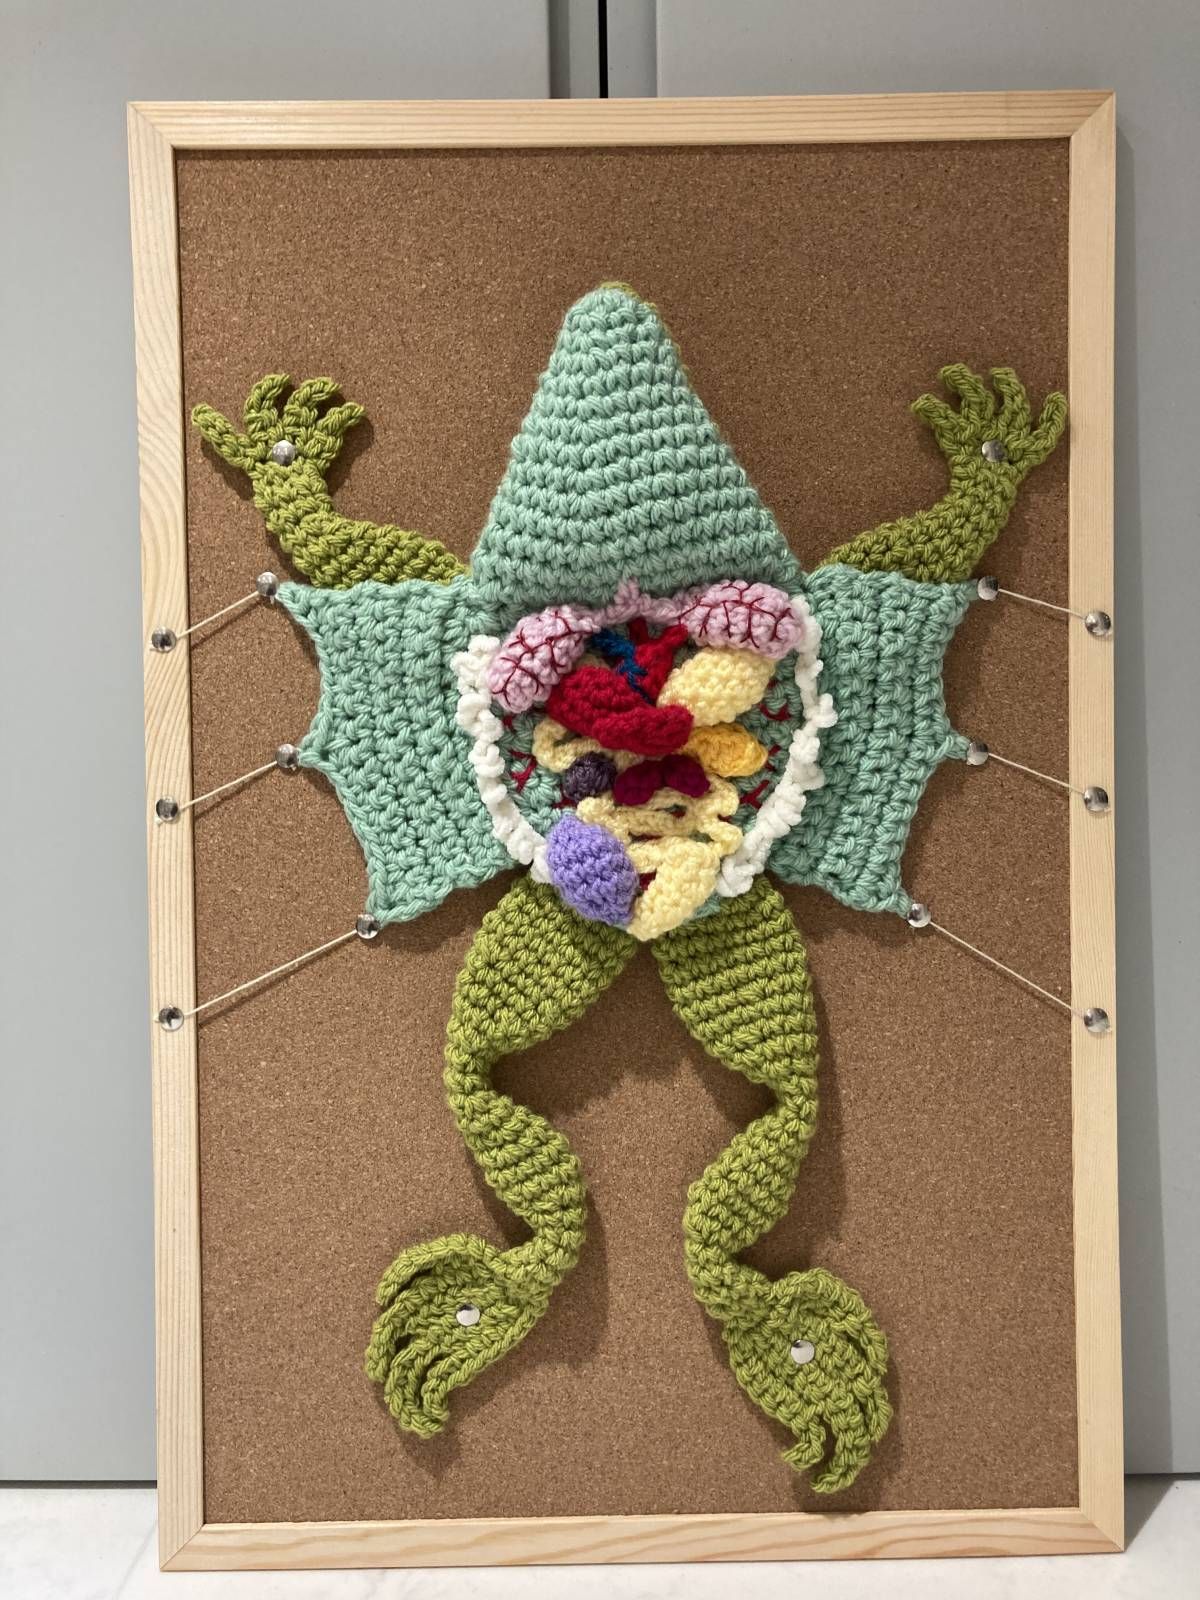 Dissected Frog Crochet Amigurumi Pattern Review by Eva Black for Cottontail and Whiskers